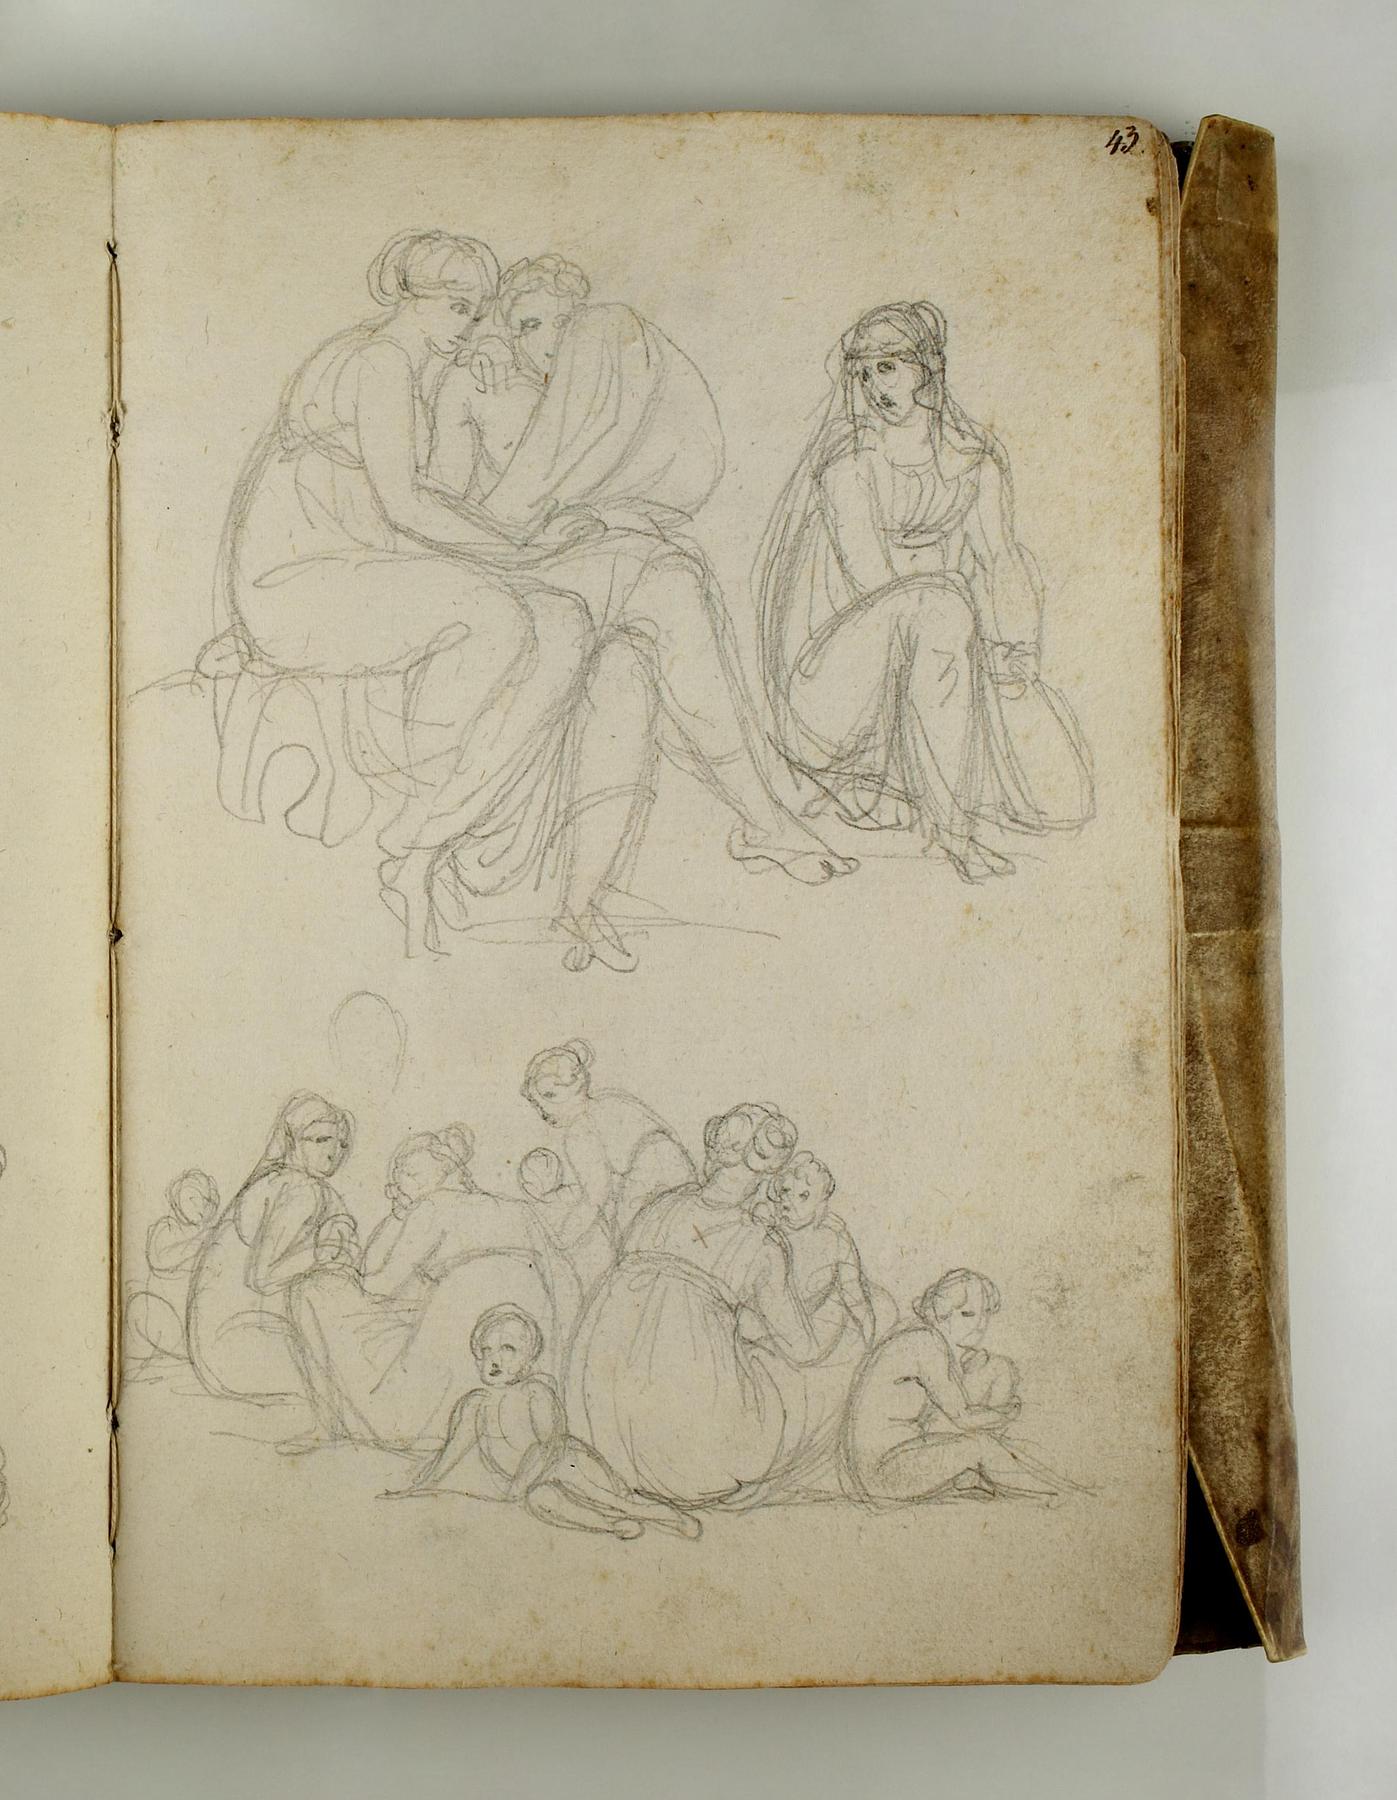 Seated man and woman. Woman praying. Group of women with children, C562,43r